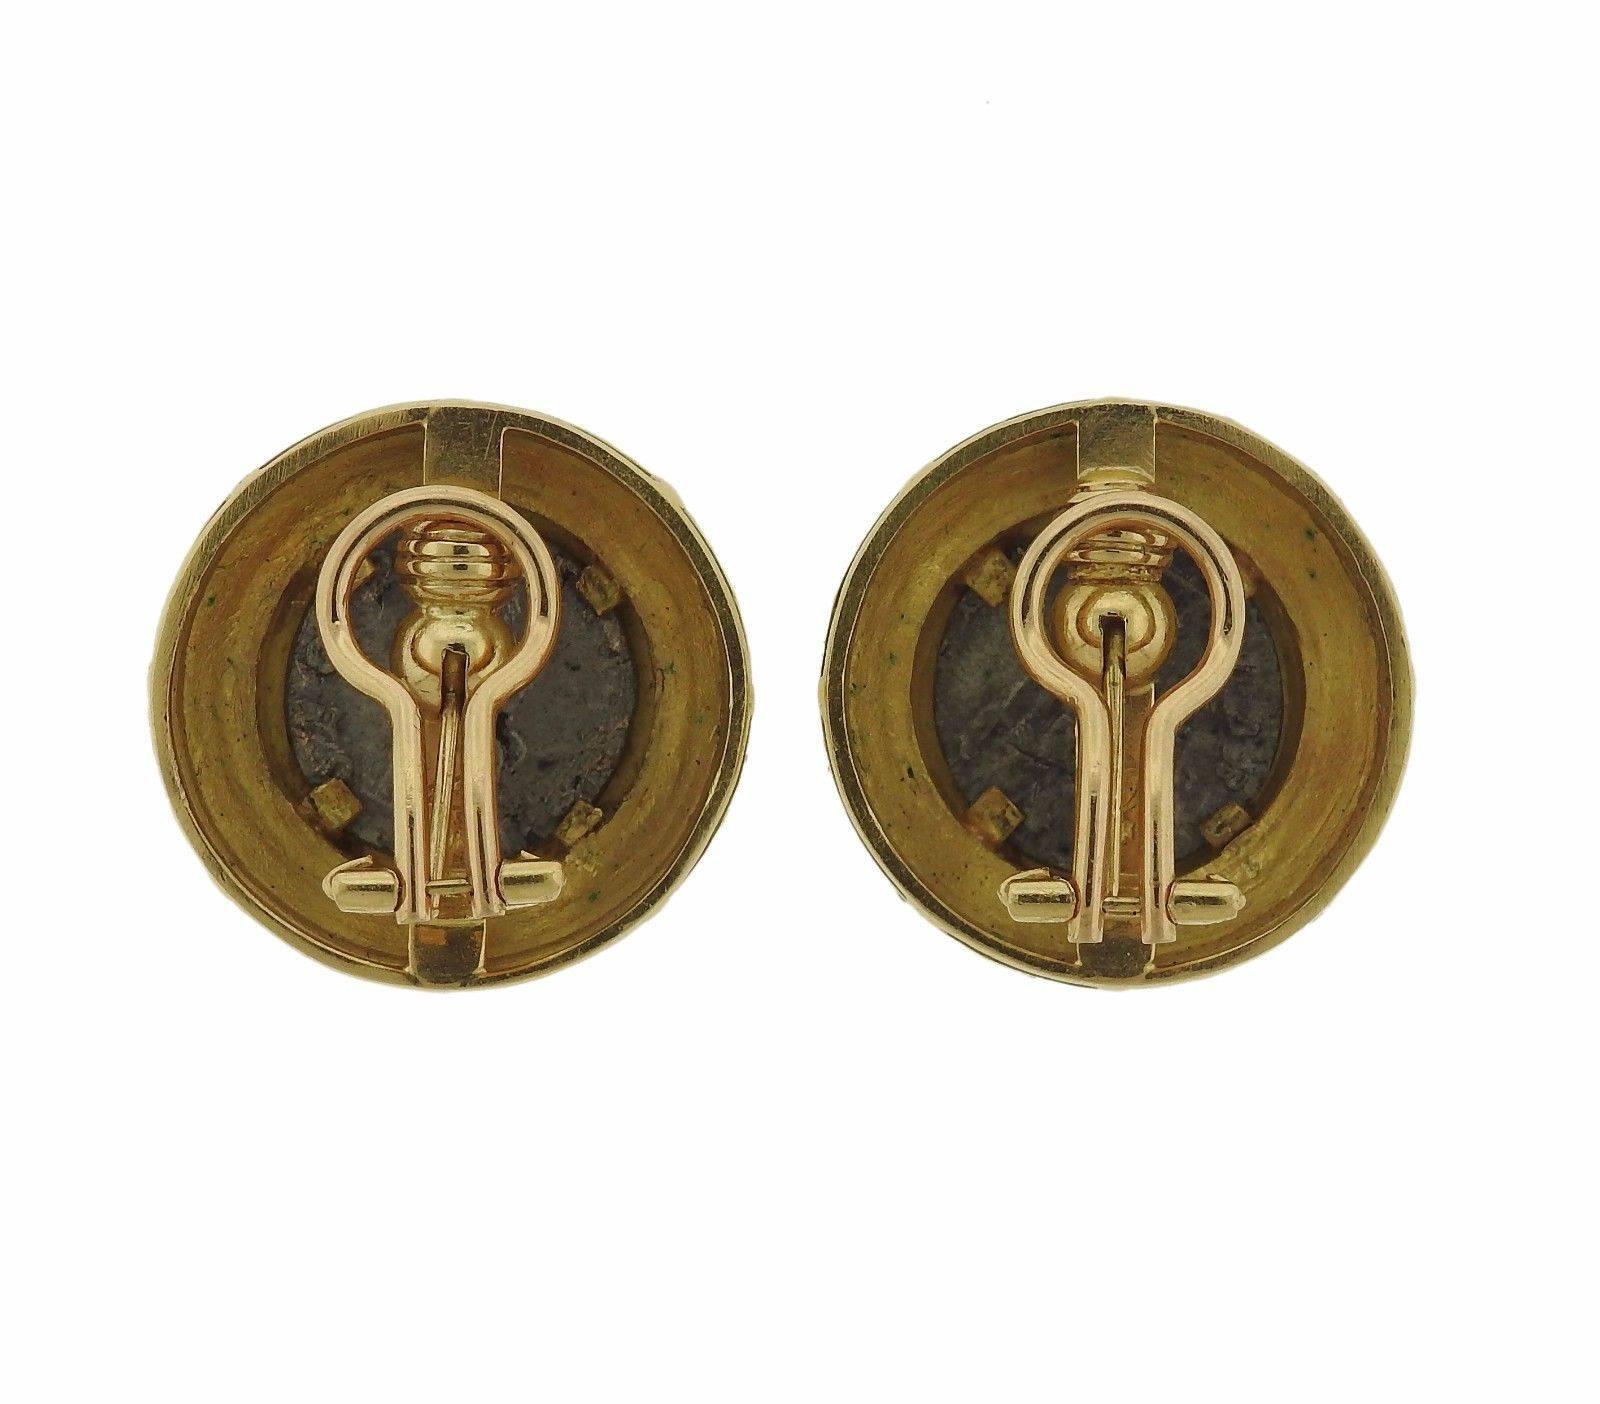 A pair of 19k gold earrings set with 14.5mm coins.  The earrings measure 26mm in diameter and weigh 28.9 grams.  Marked: 19k, Locke Hallmark.